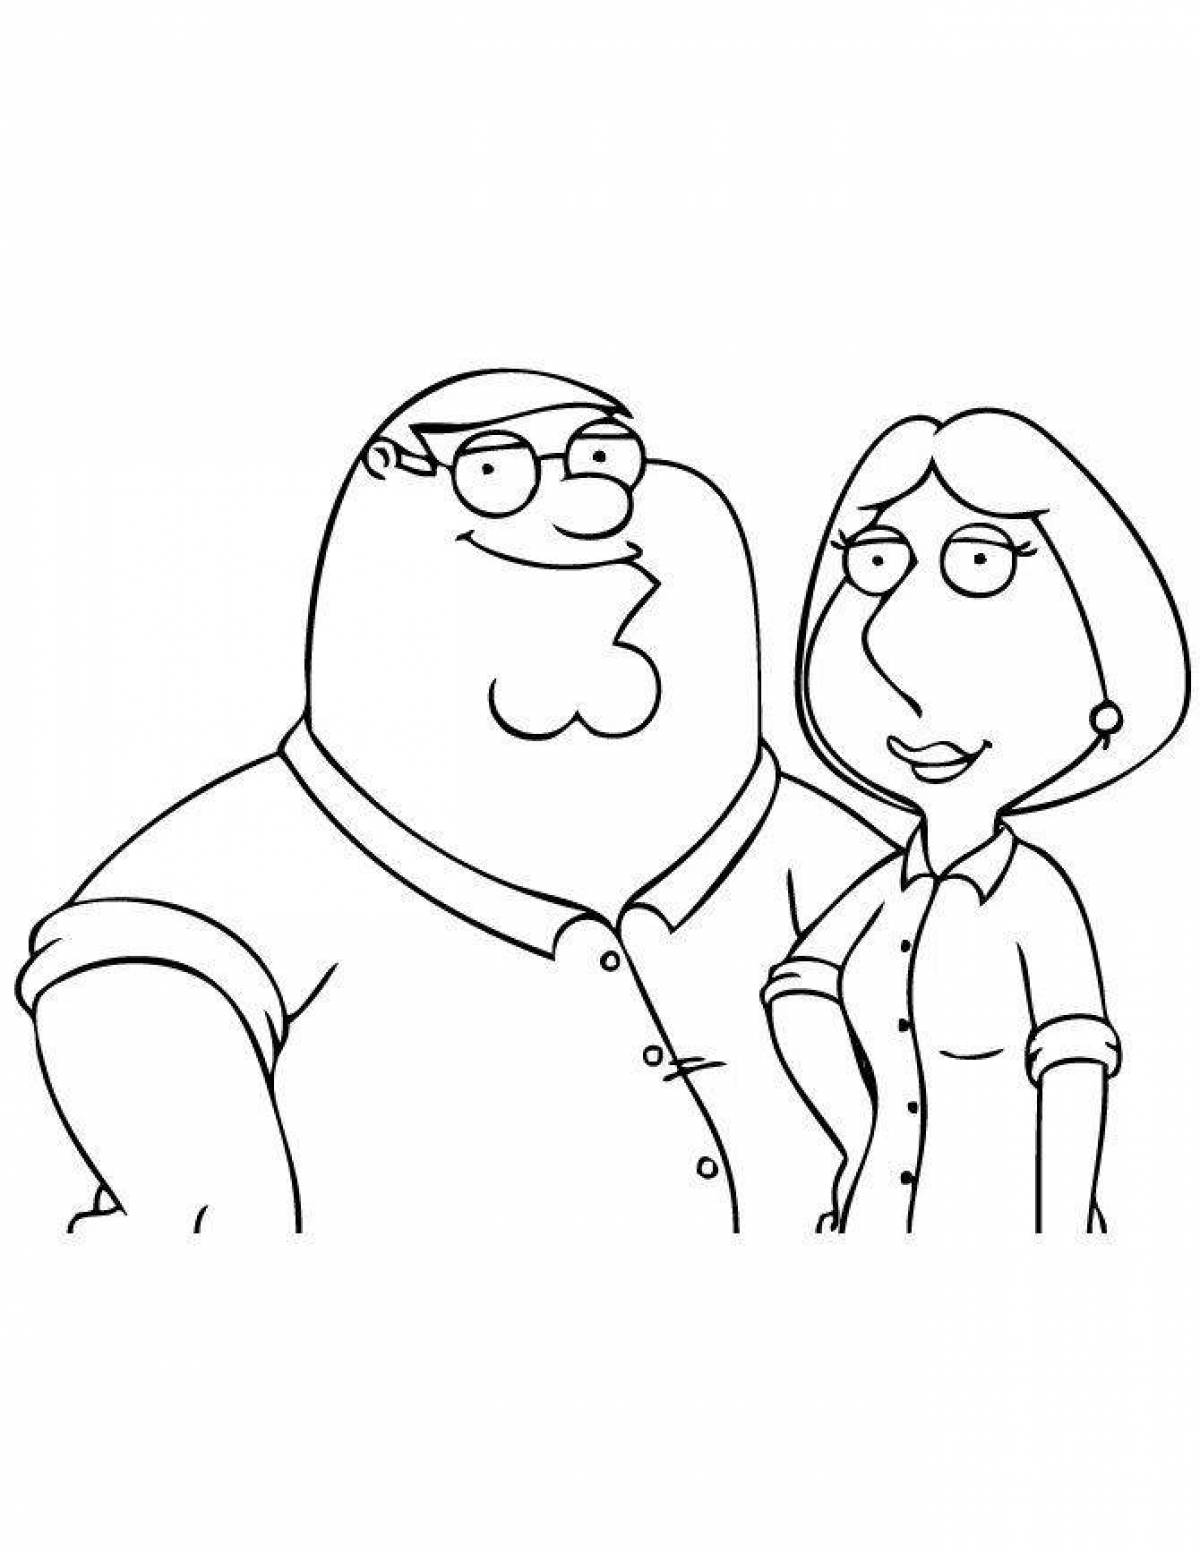 Peter griffin's funny coloring book